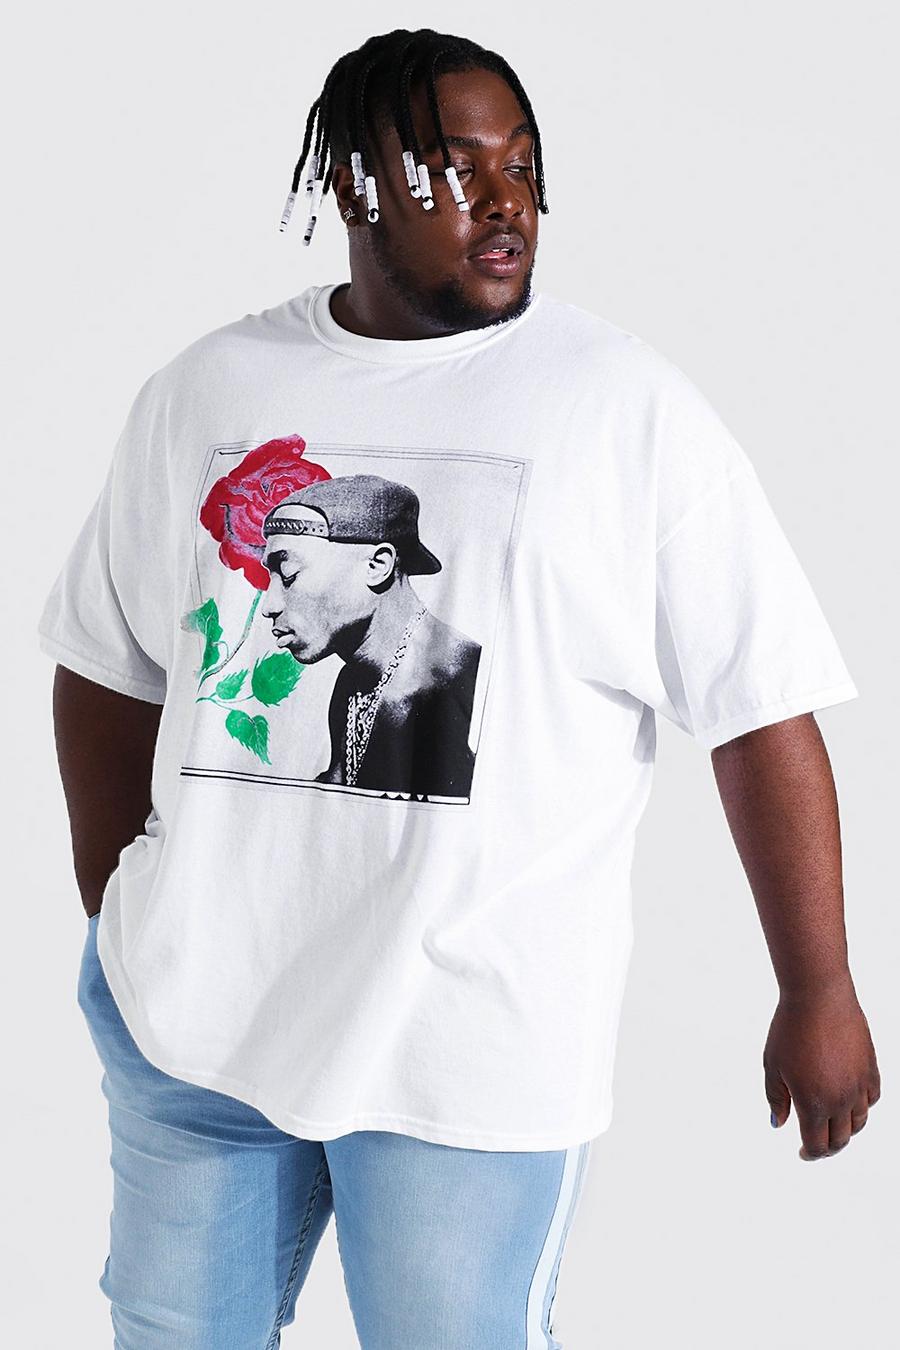 T-shirt Plus Size ufficiale di Tupac con rosa, White image number 1